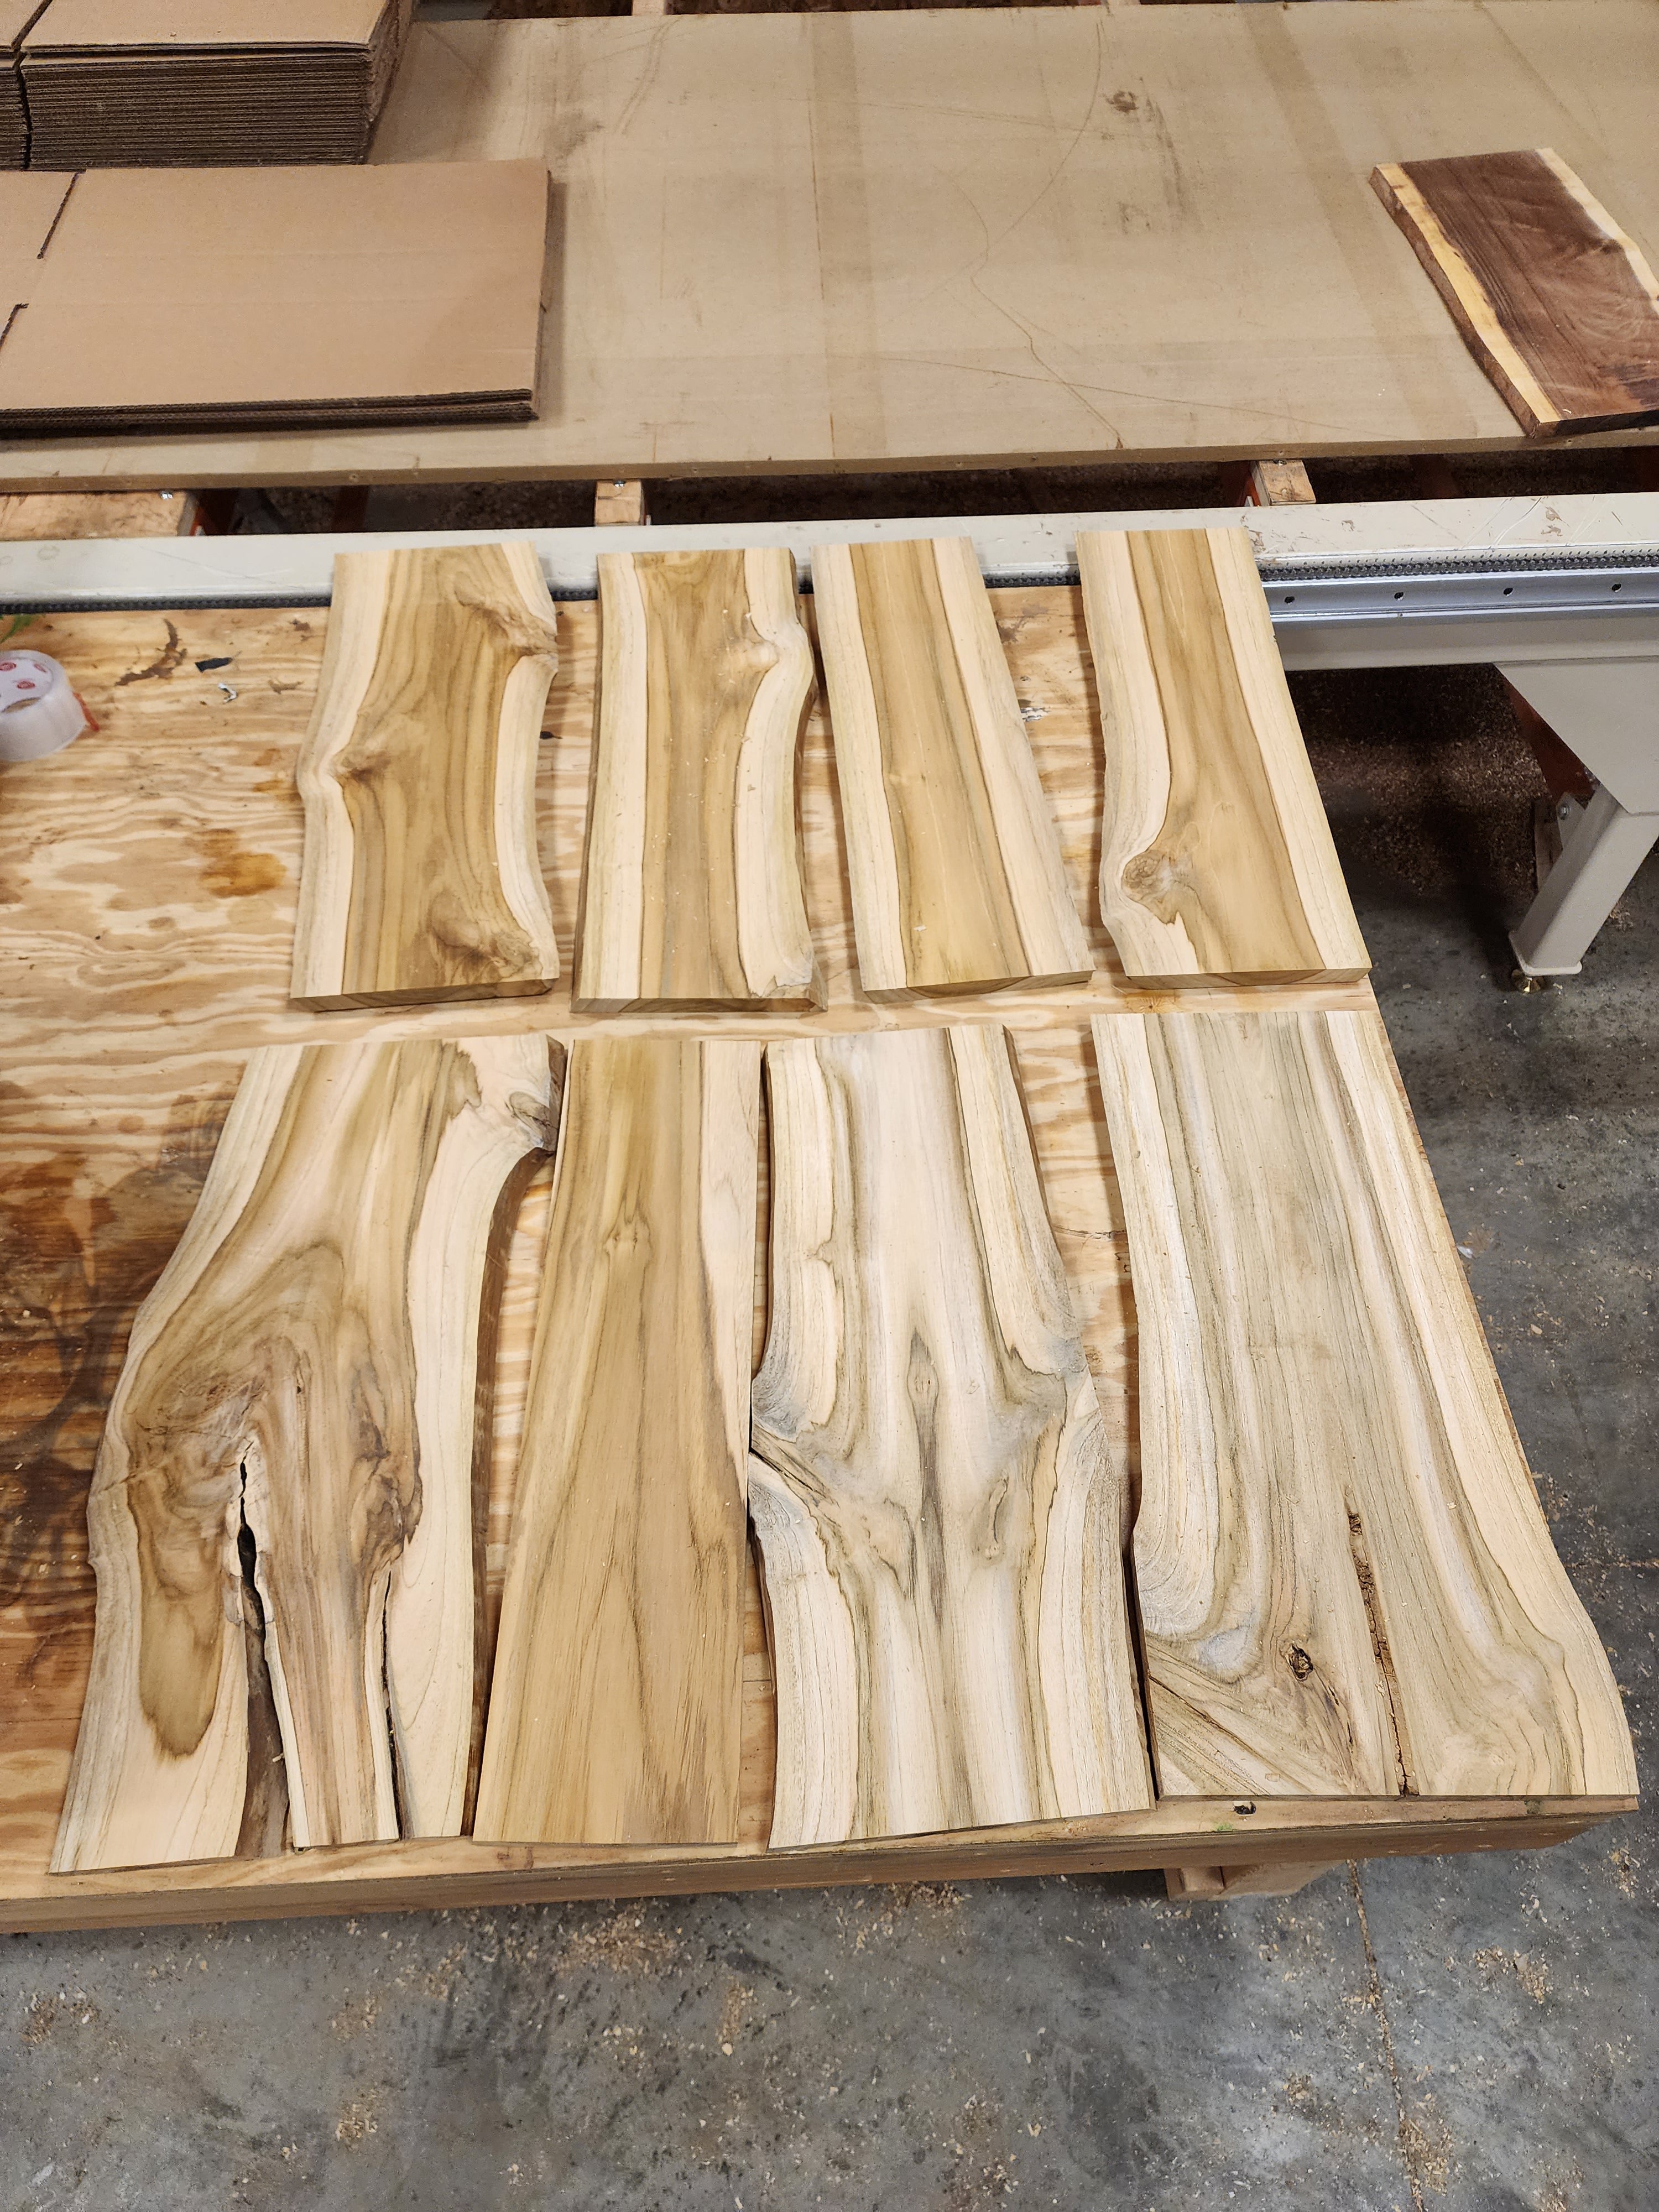 Live Edge Lumber - Pick In Store - Multiple Species Available